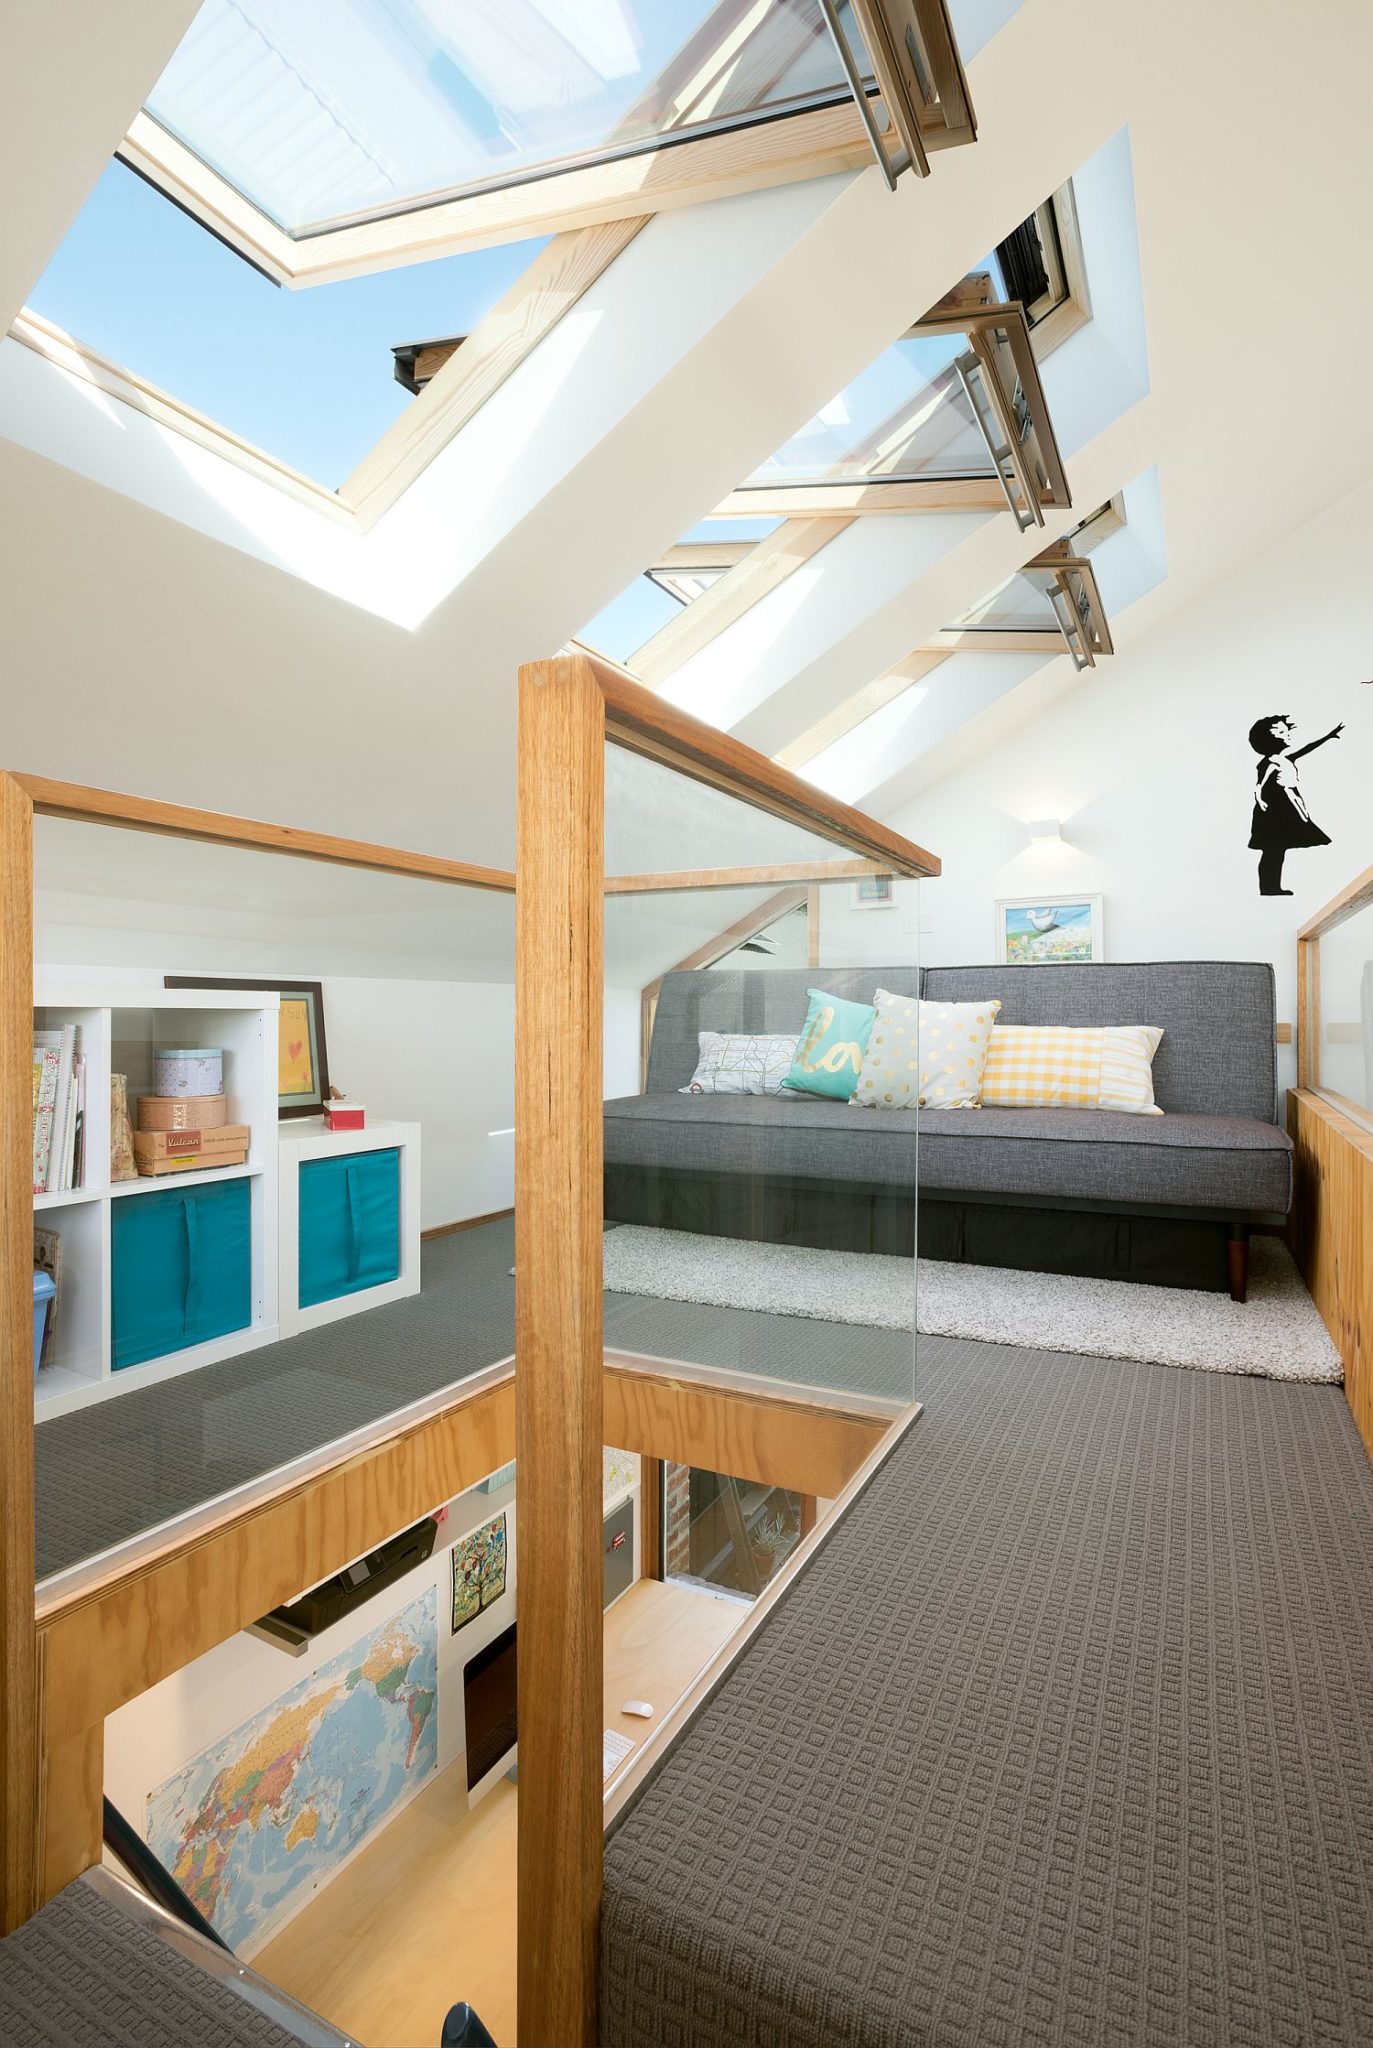 Skylight-above-the-stairway-brings-light-even-to-the-lower-level